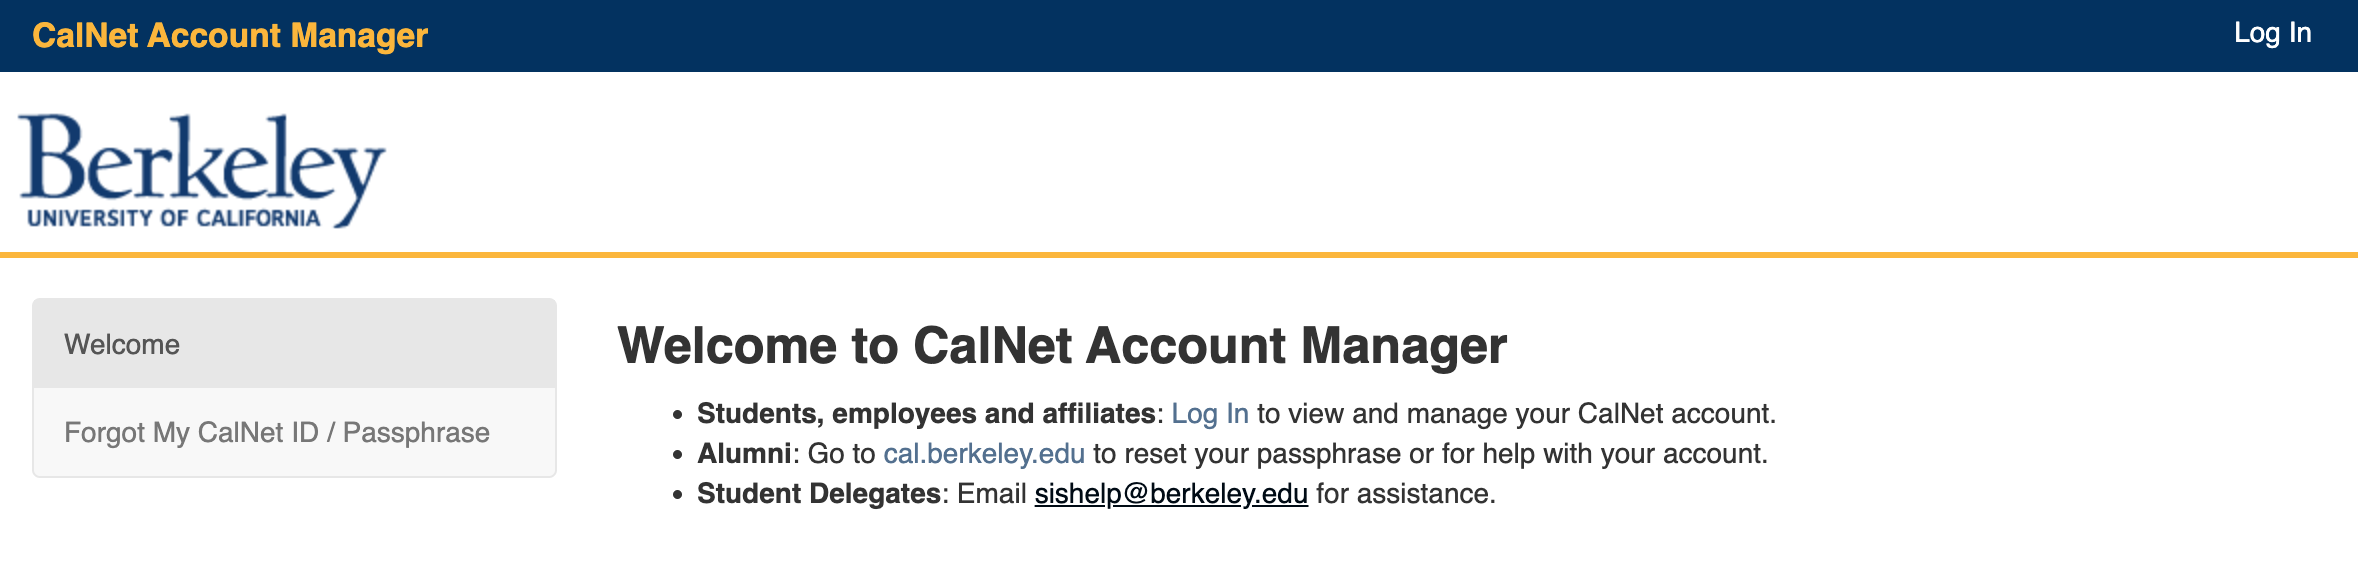 Shows home screen for mycalnet.berkeley.edu, including a login link, which allows access to CalNet applications